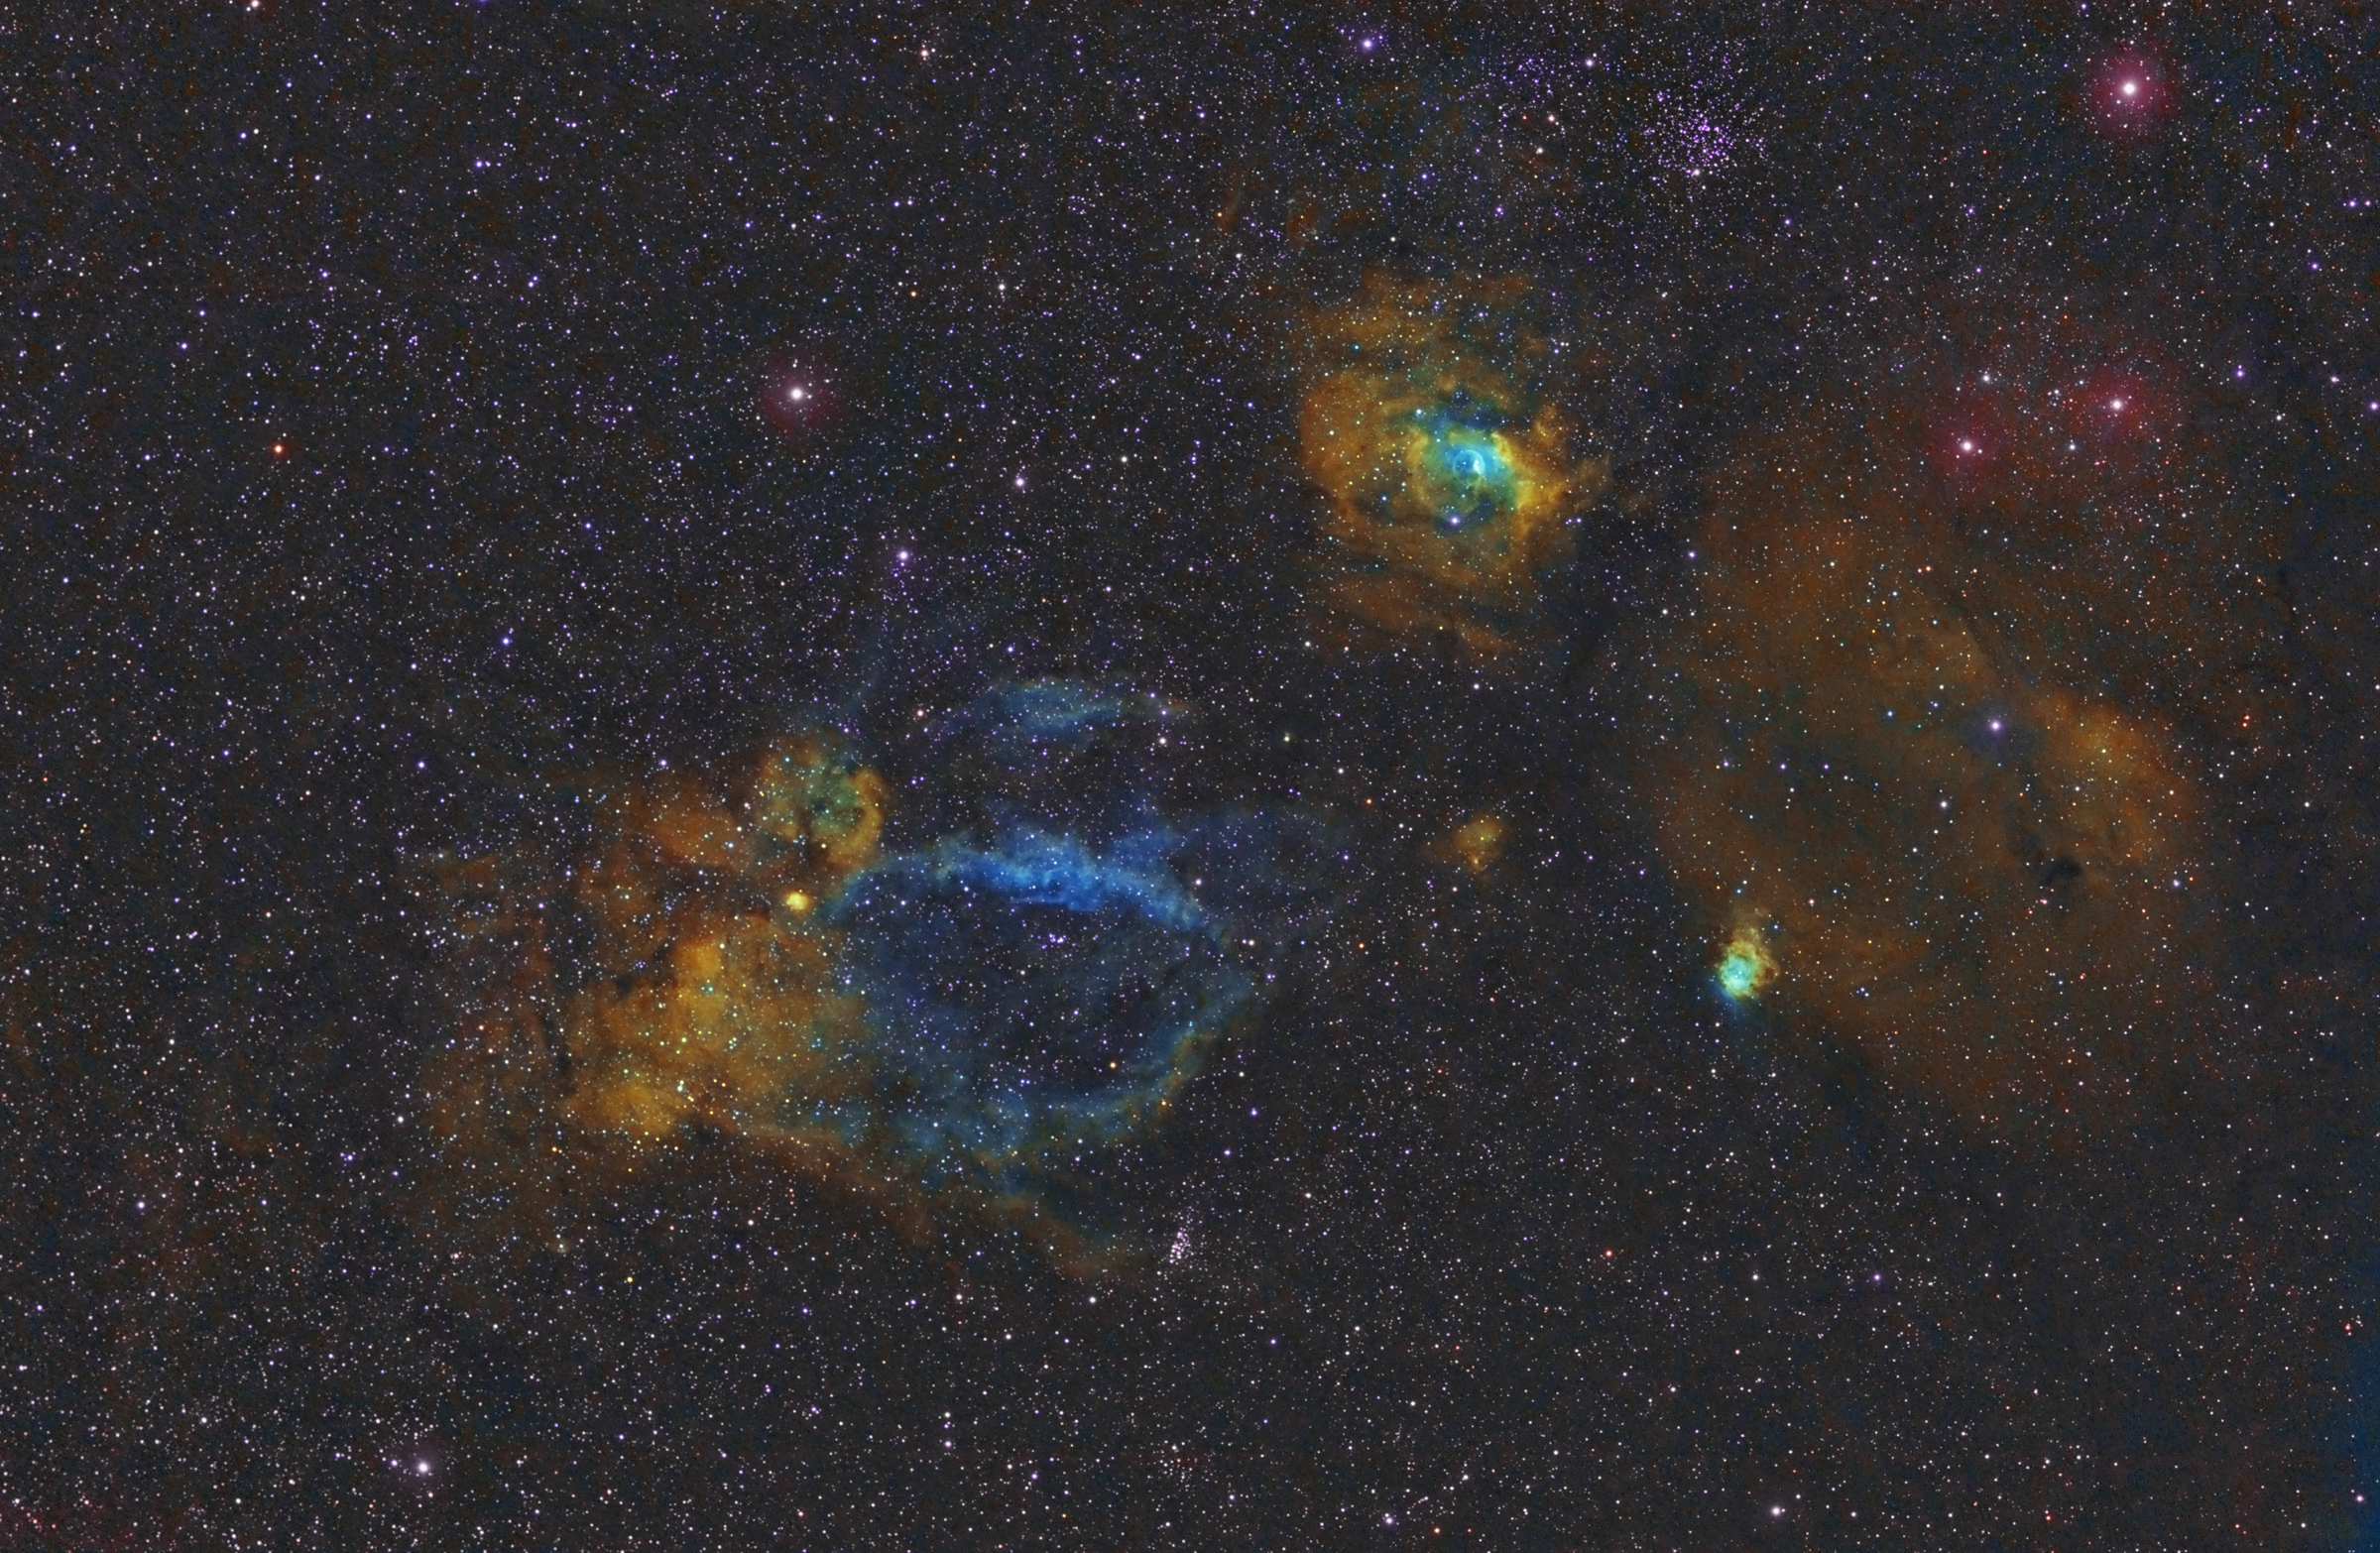 NGC7635 (Bubble nebula) and neighbours in HST palette